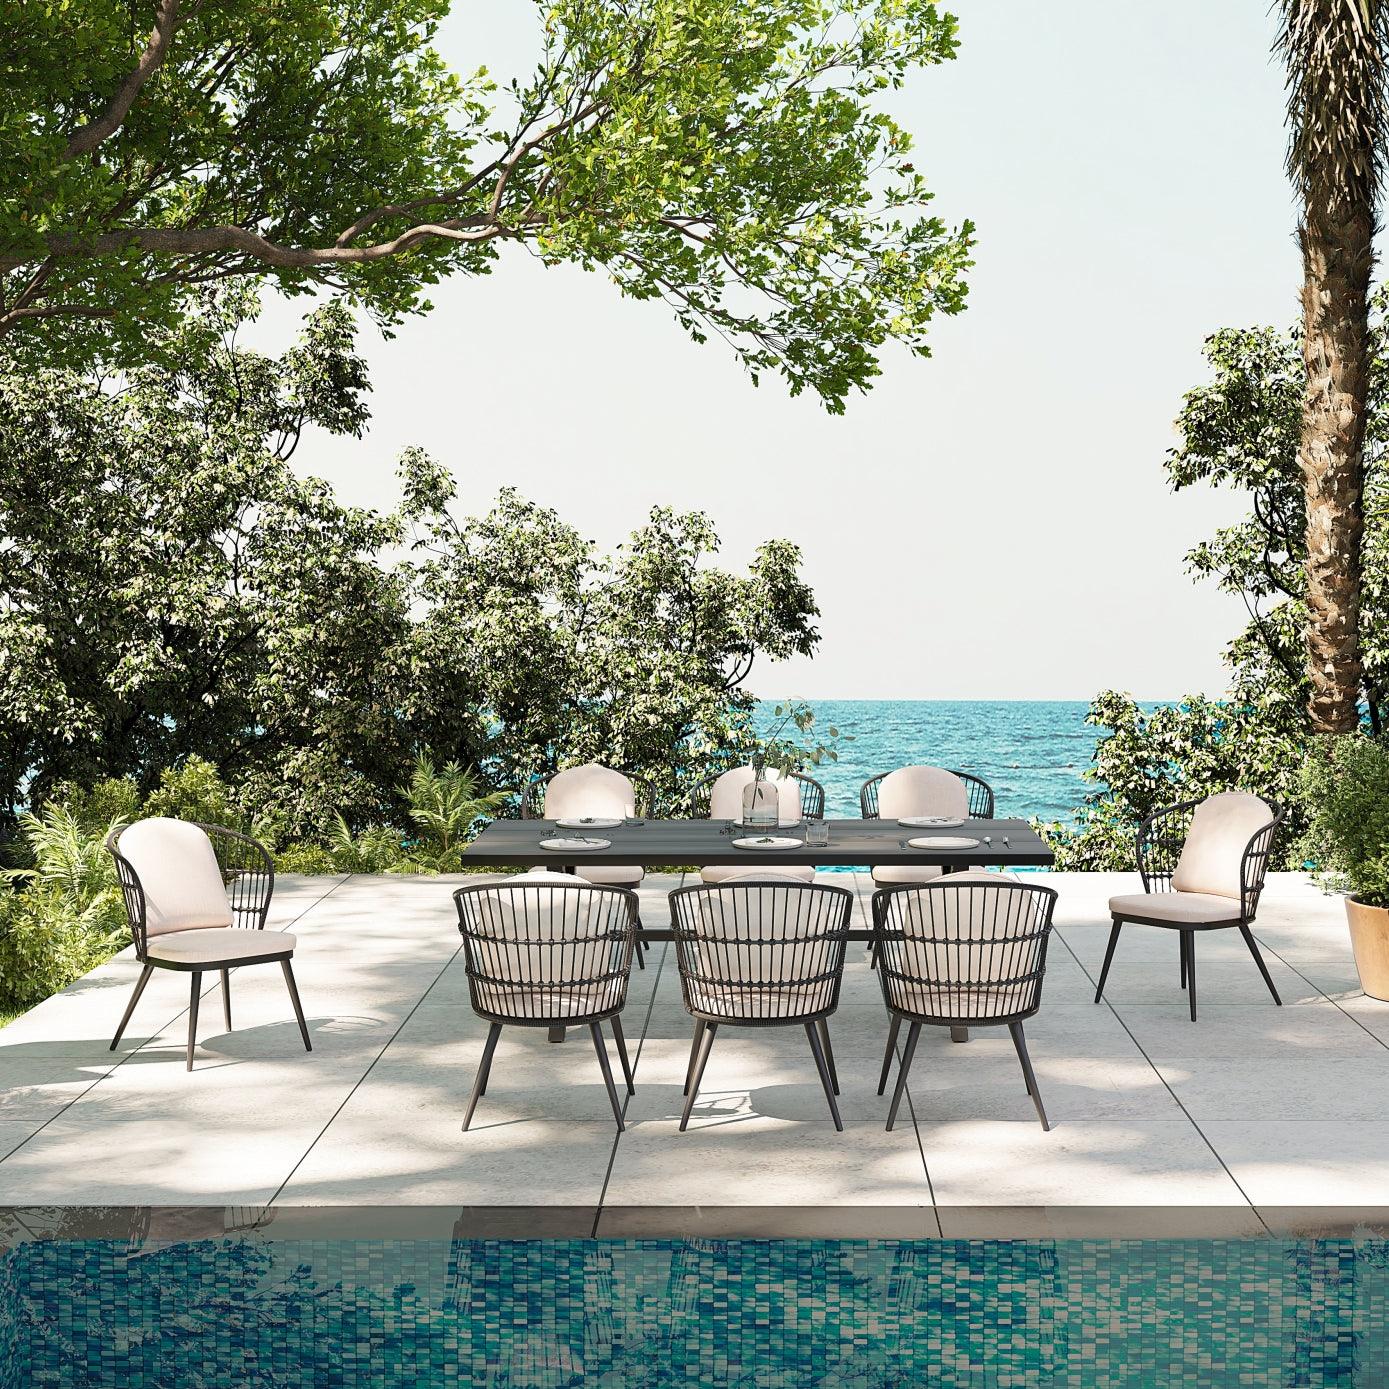 Comino dark grey aluminum outdoor Dining Set for 8 with light grey cushions, 8 dining seats with backrest rope design, 1 rectangle aluminum dining table with x-shaped legs, under the tree - Jardina Furniture#Pieces_9-pc.